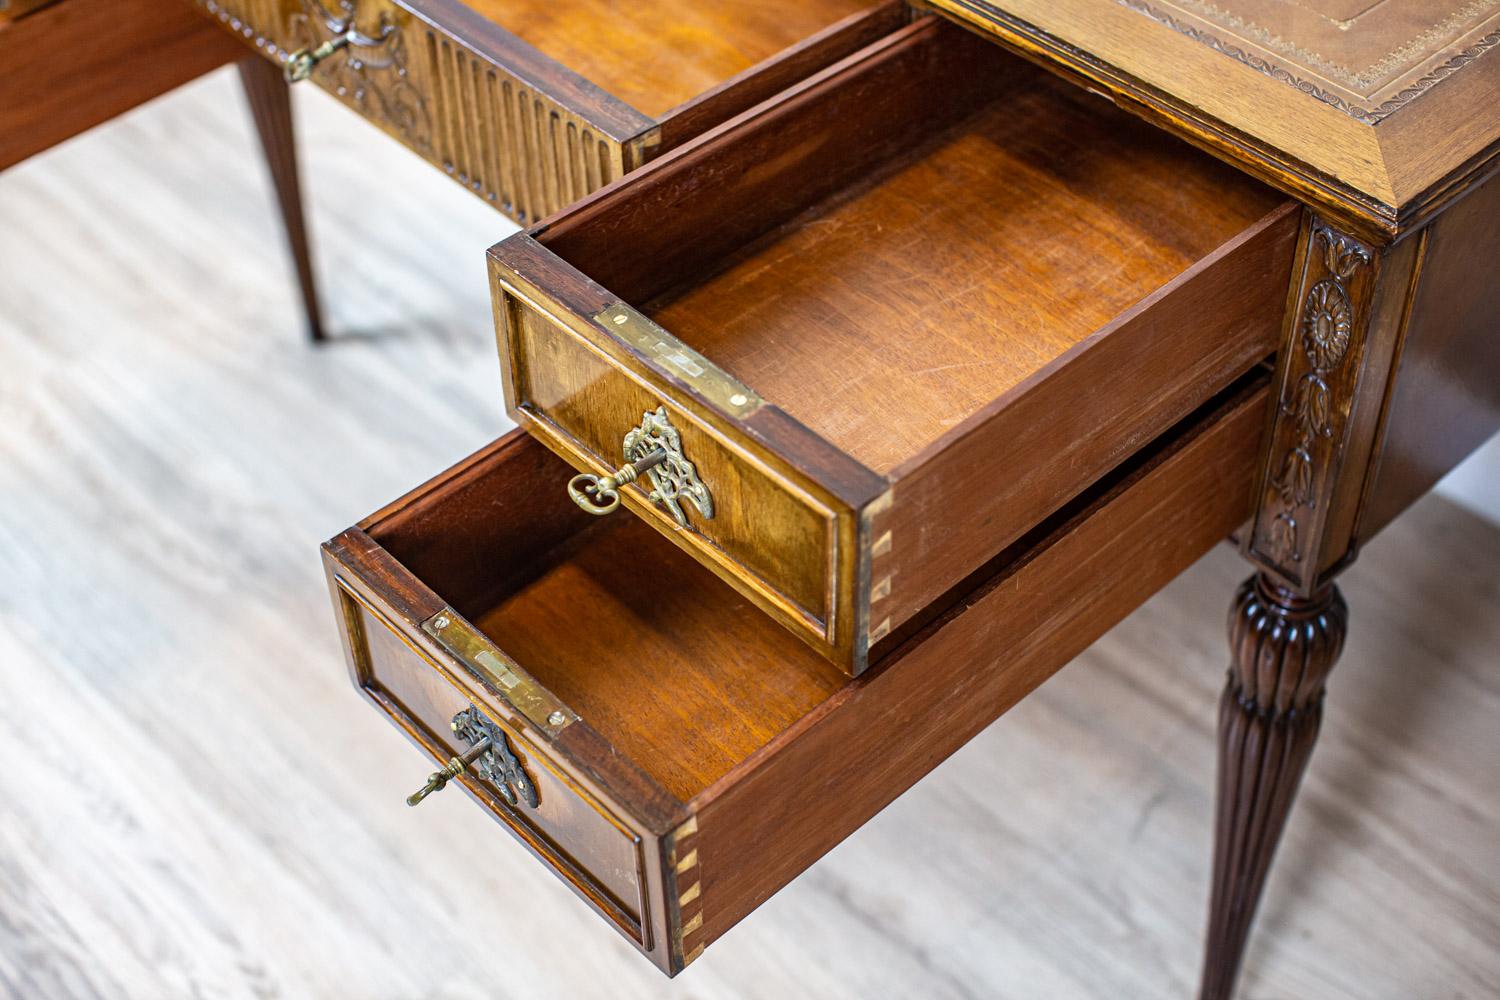 Leather Lady's Mahogany Desk from the Late 19th Century in Brass Details